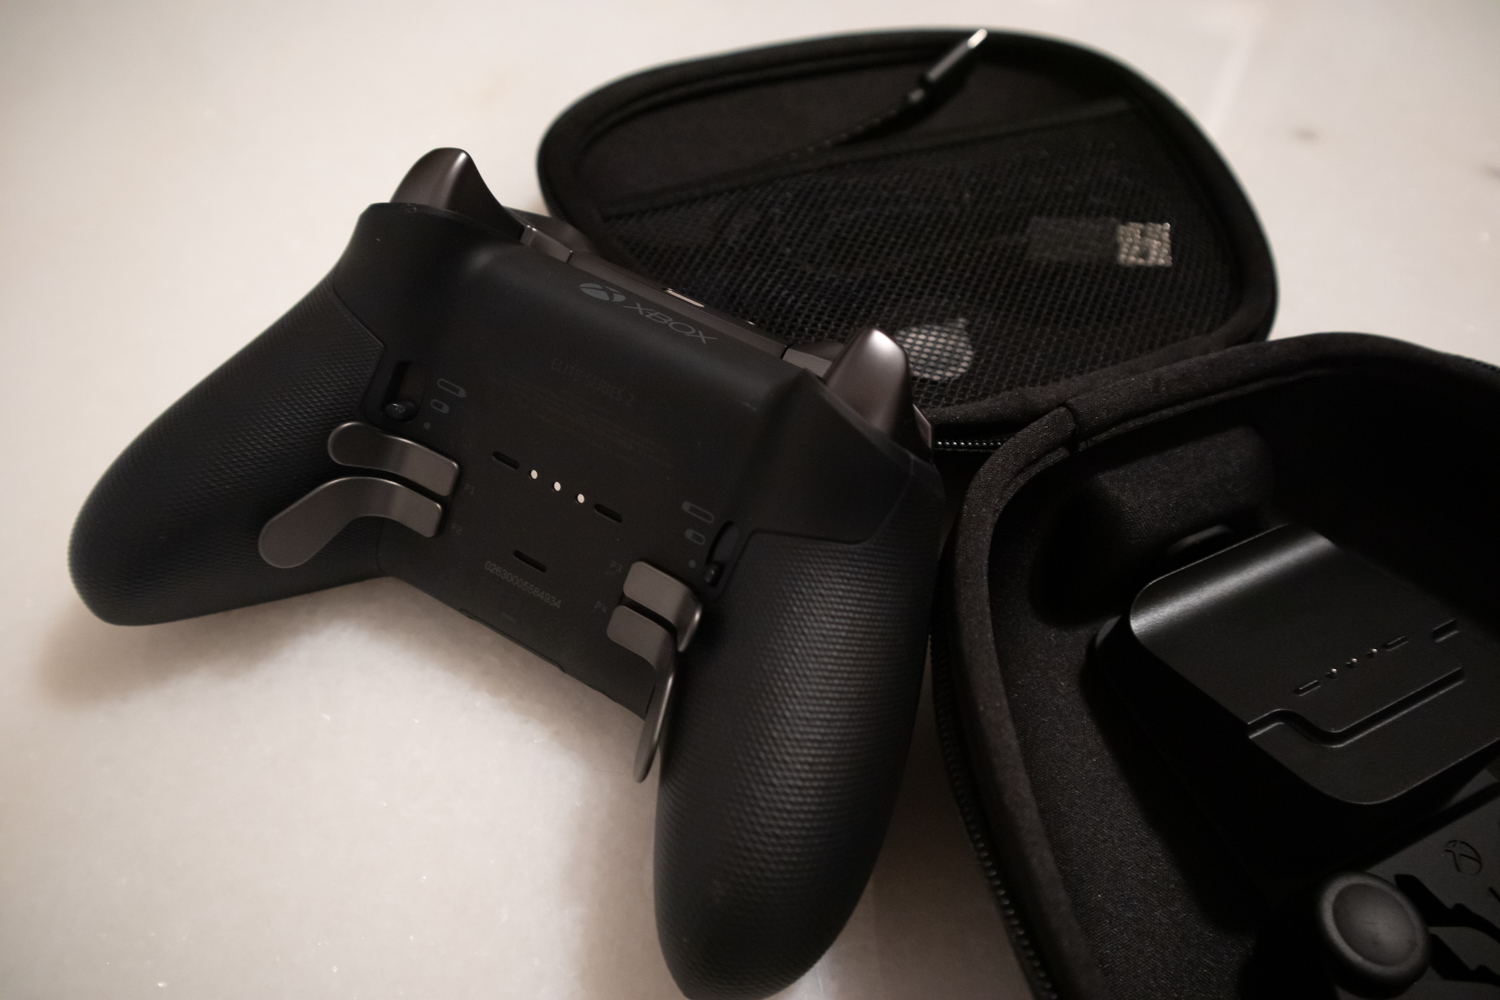 Xbox Elite Wireless Controller Series 2 Review: a Top High-End Gamepad